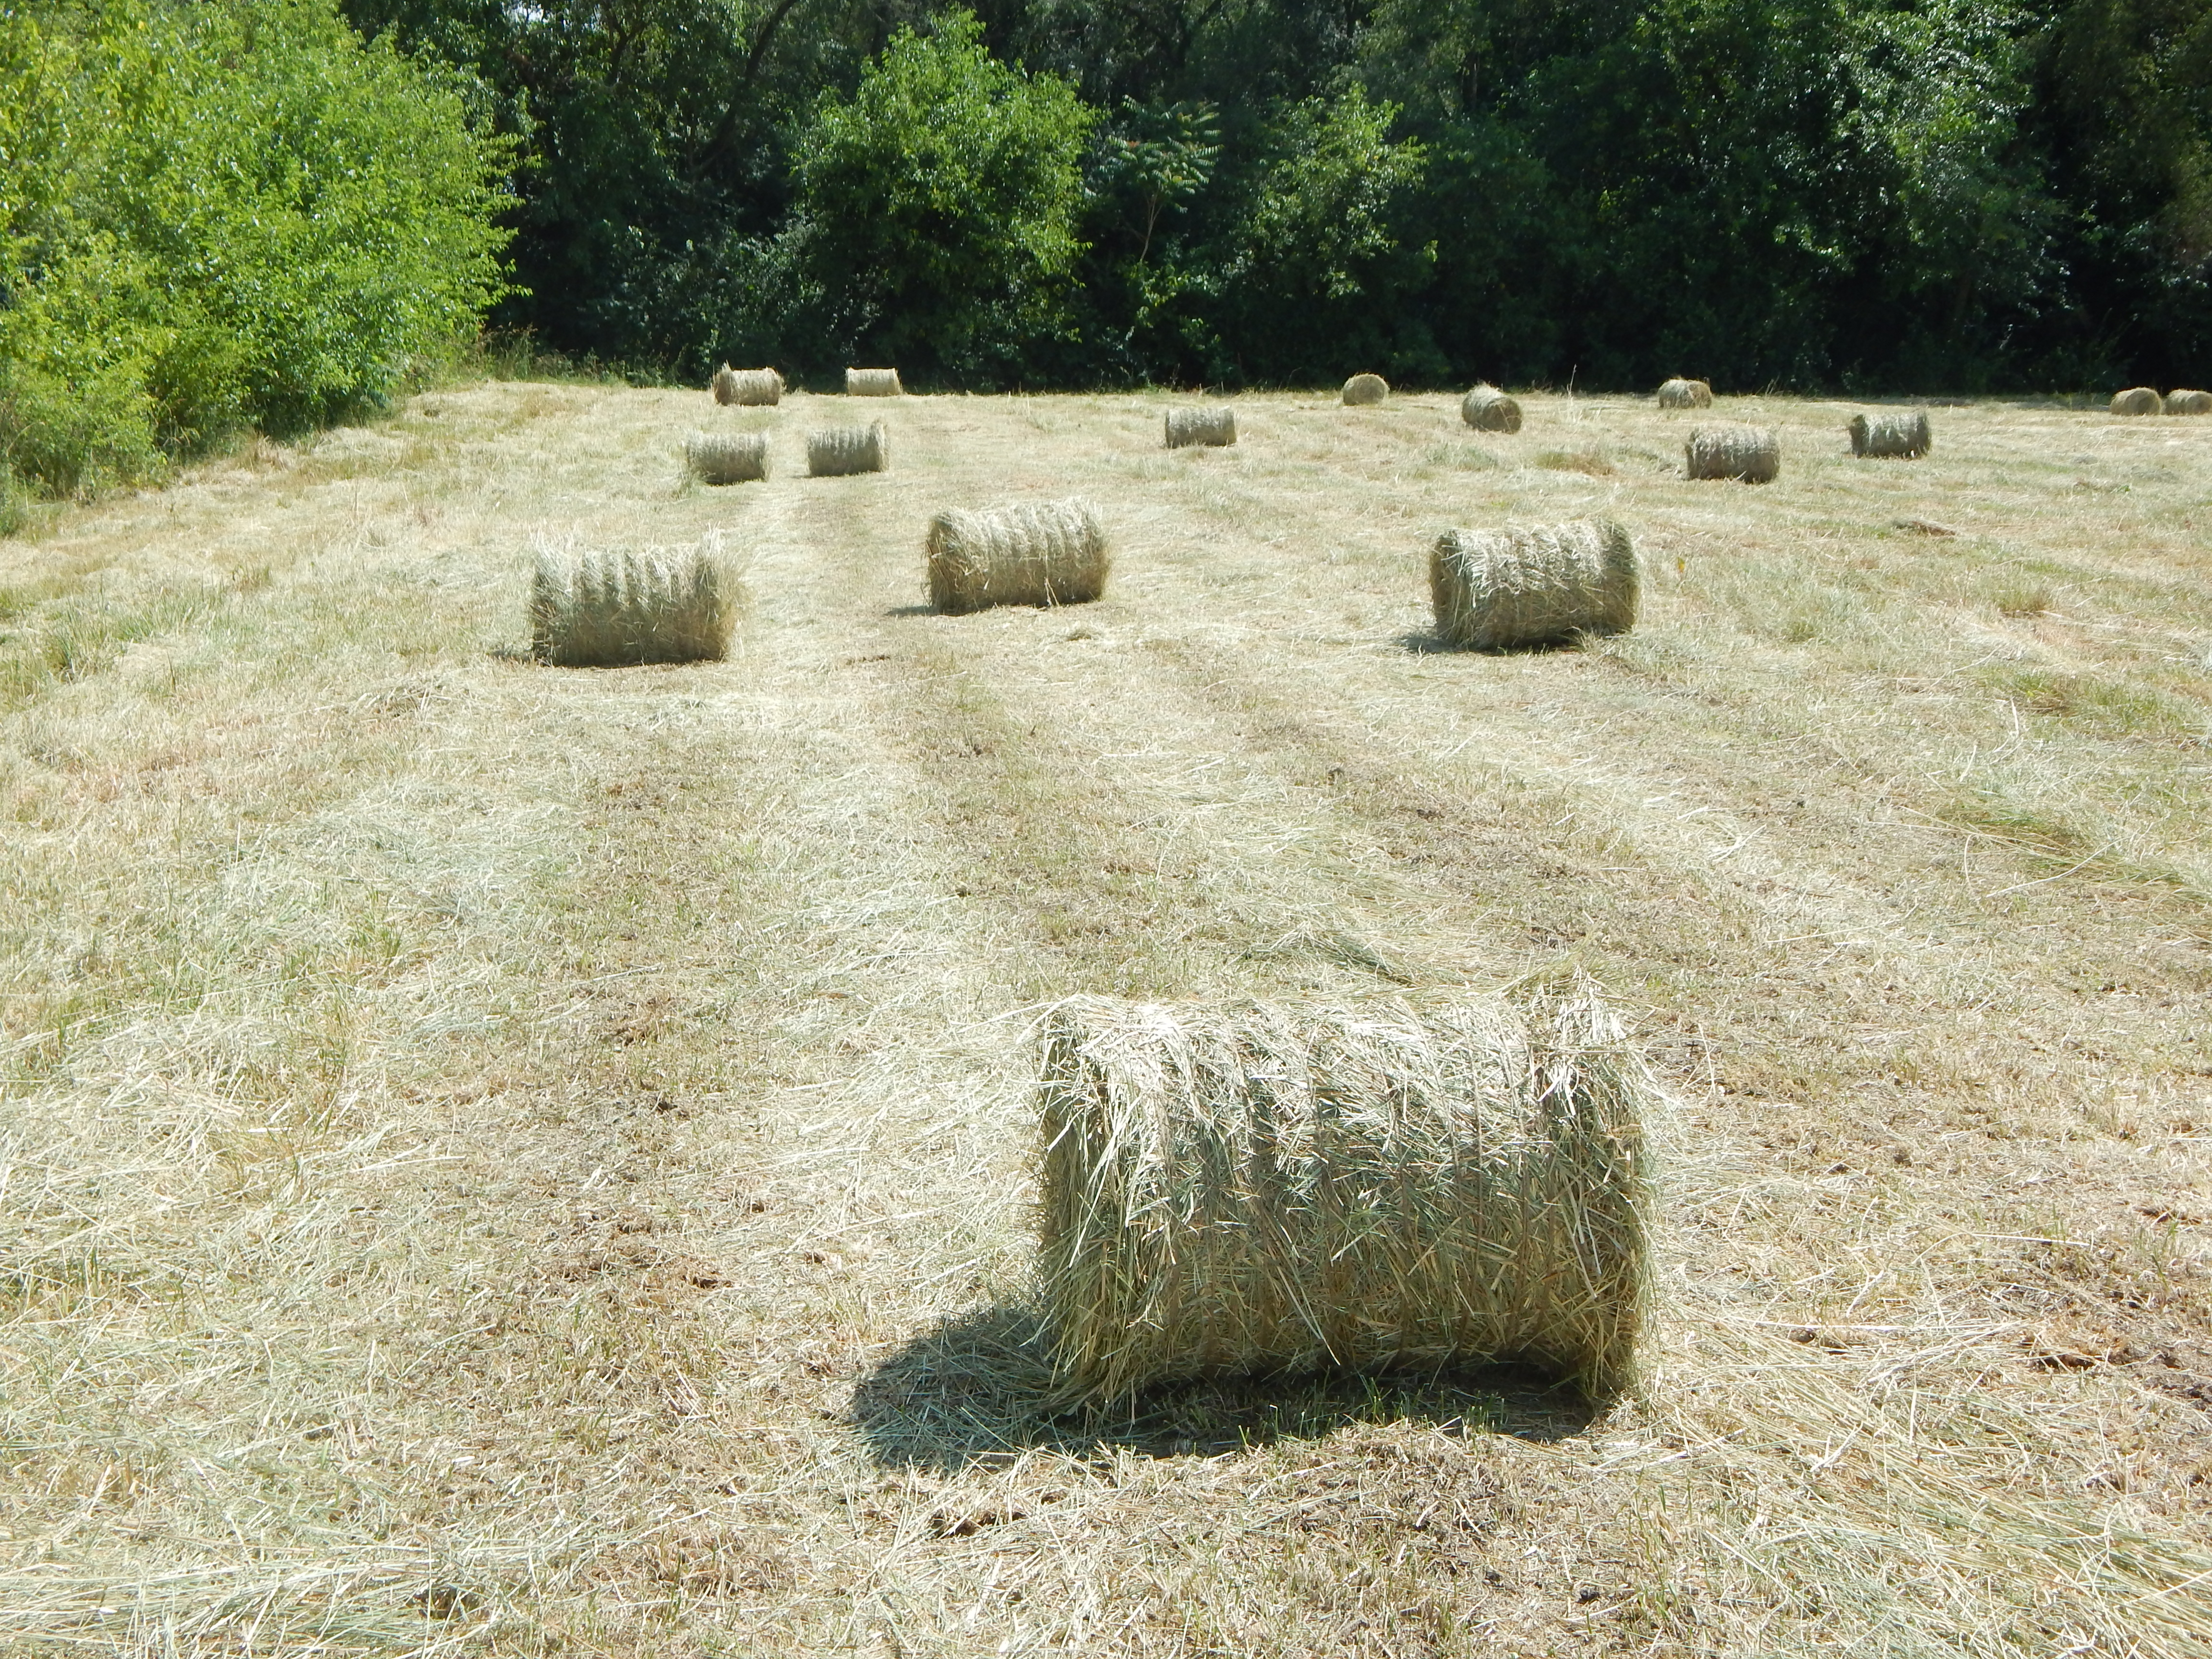 Mini round bales with twine wrap in the hay field ready to be picked up. 